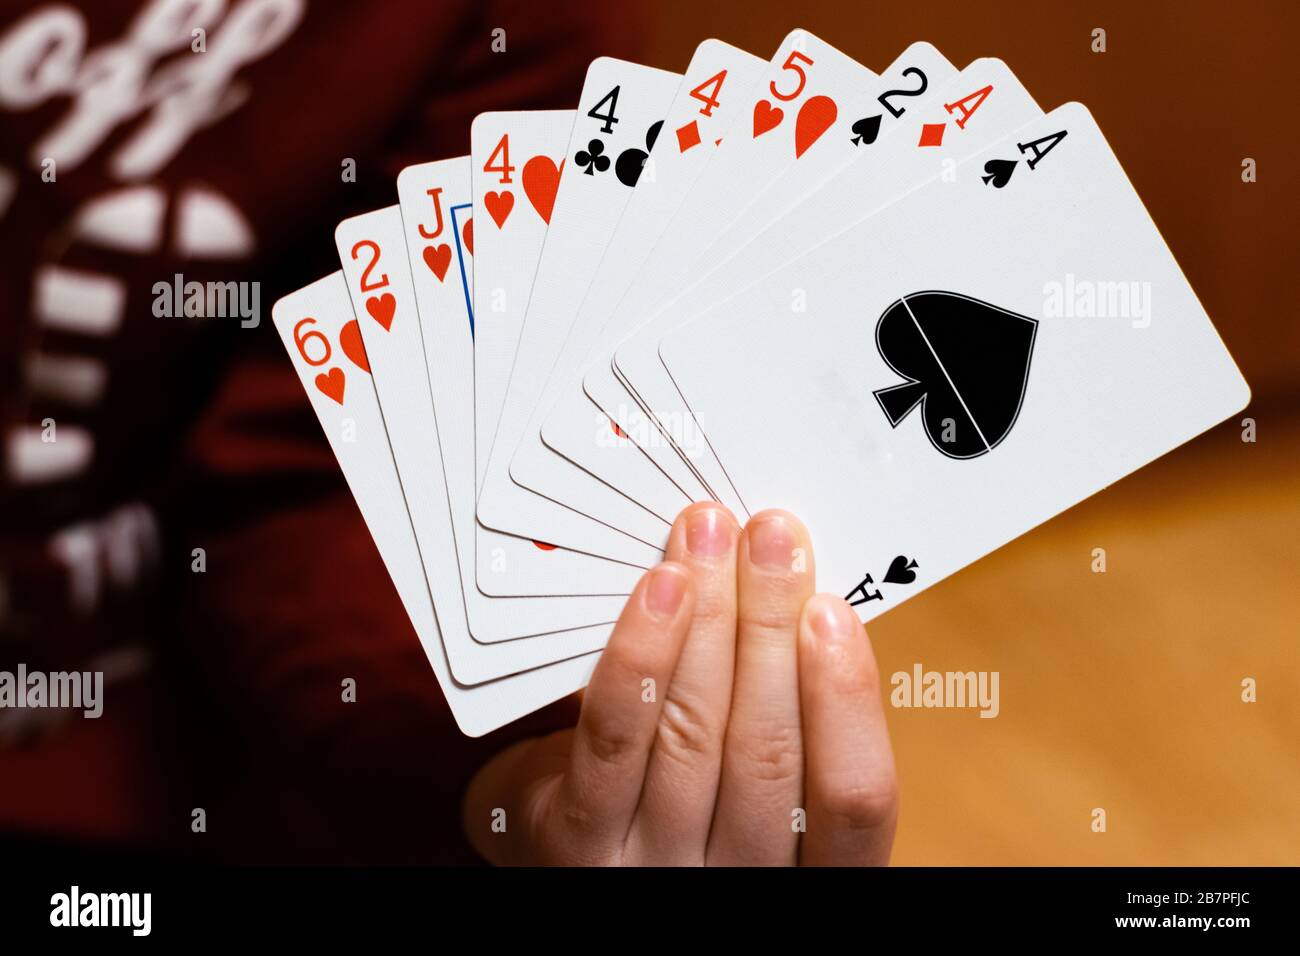 A person holding and showing a set of poker playing cards Stock Photo